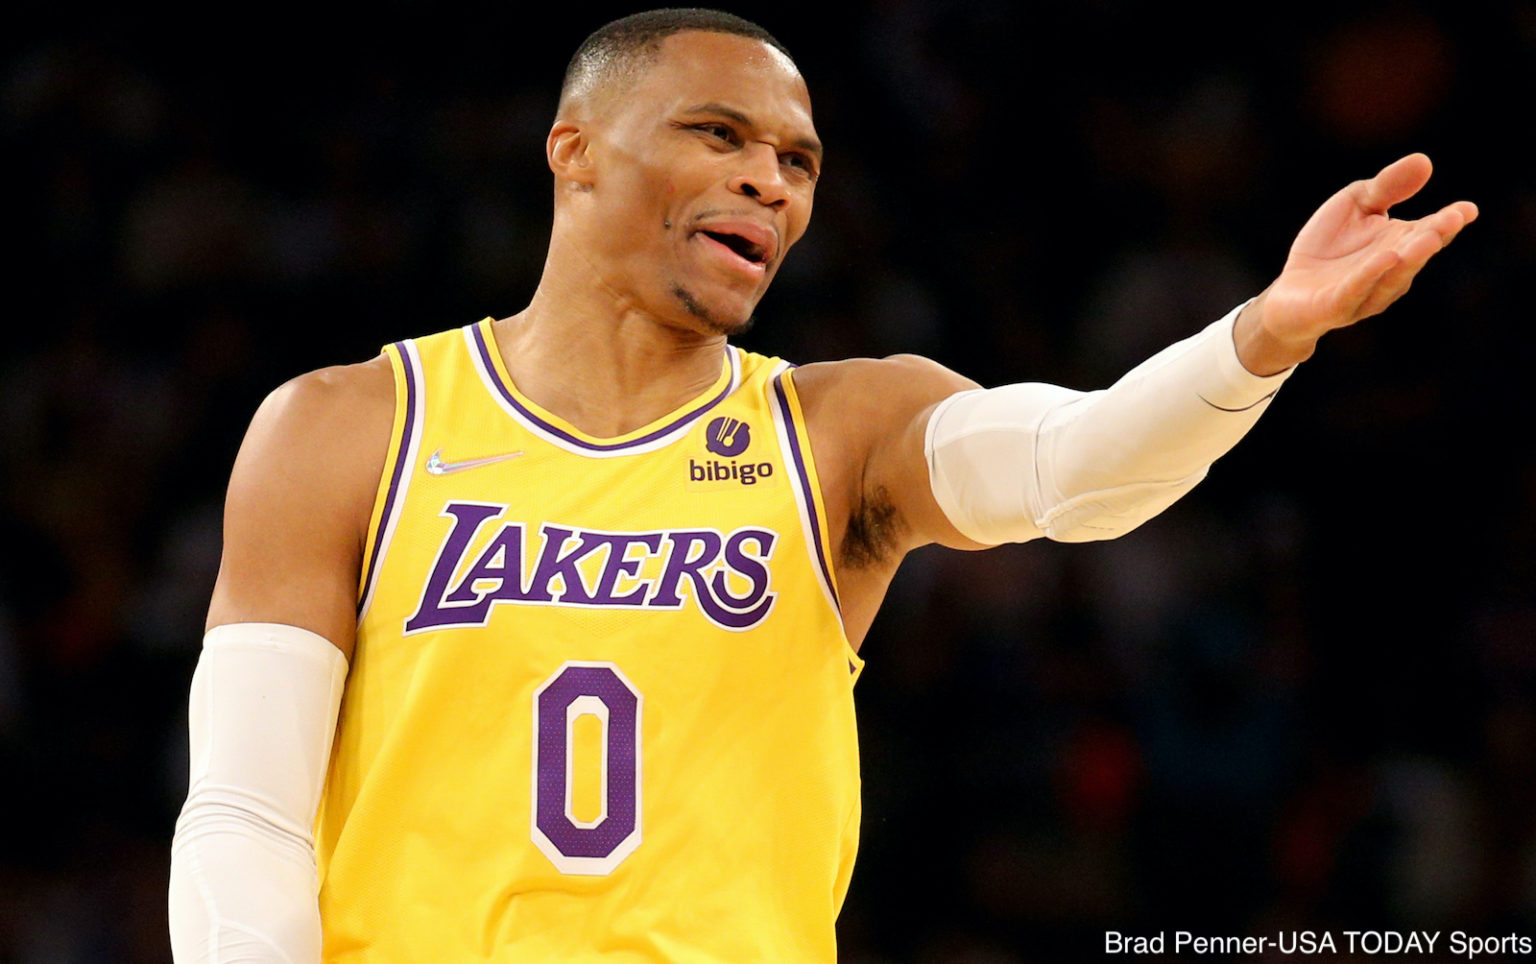 Russell Westbrook has honest comment about his play